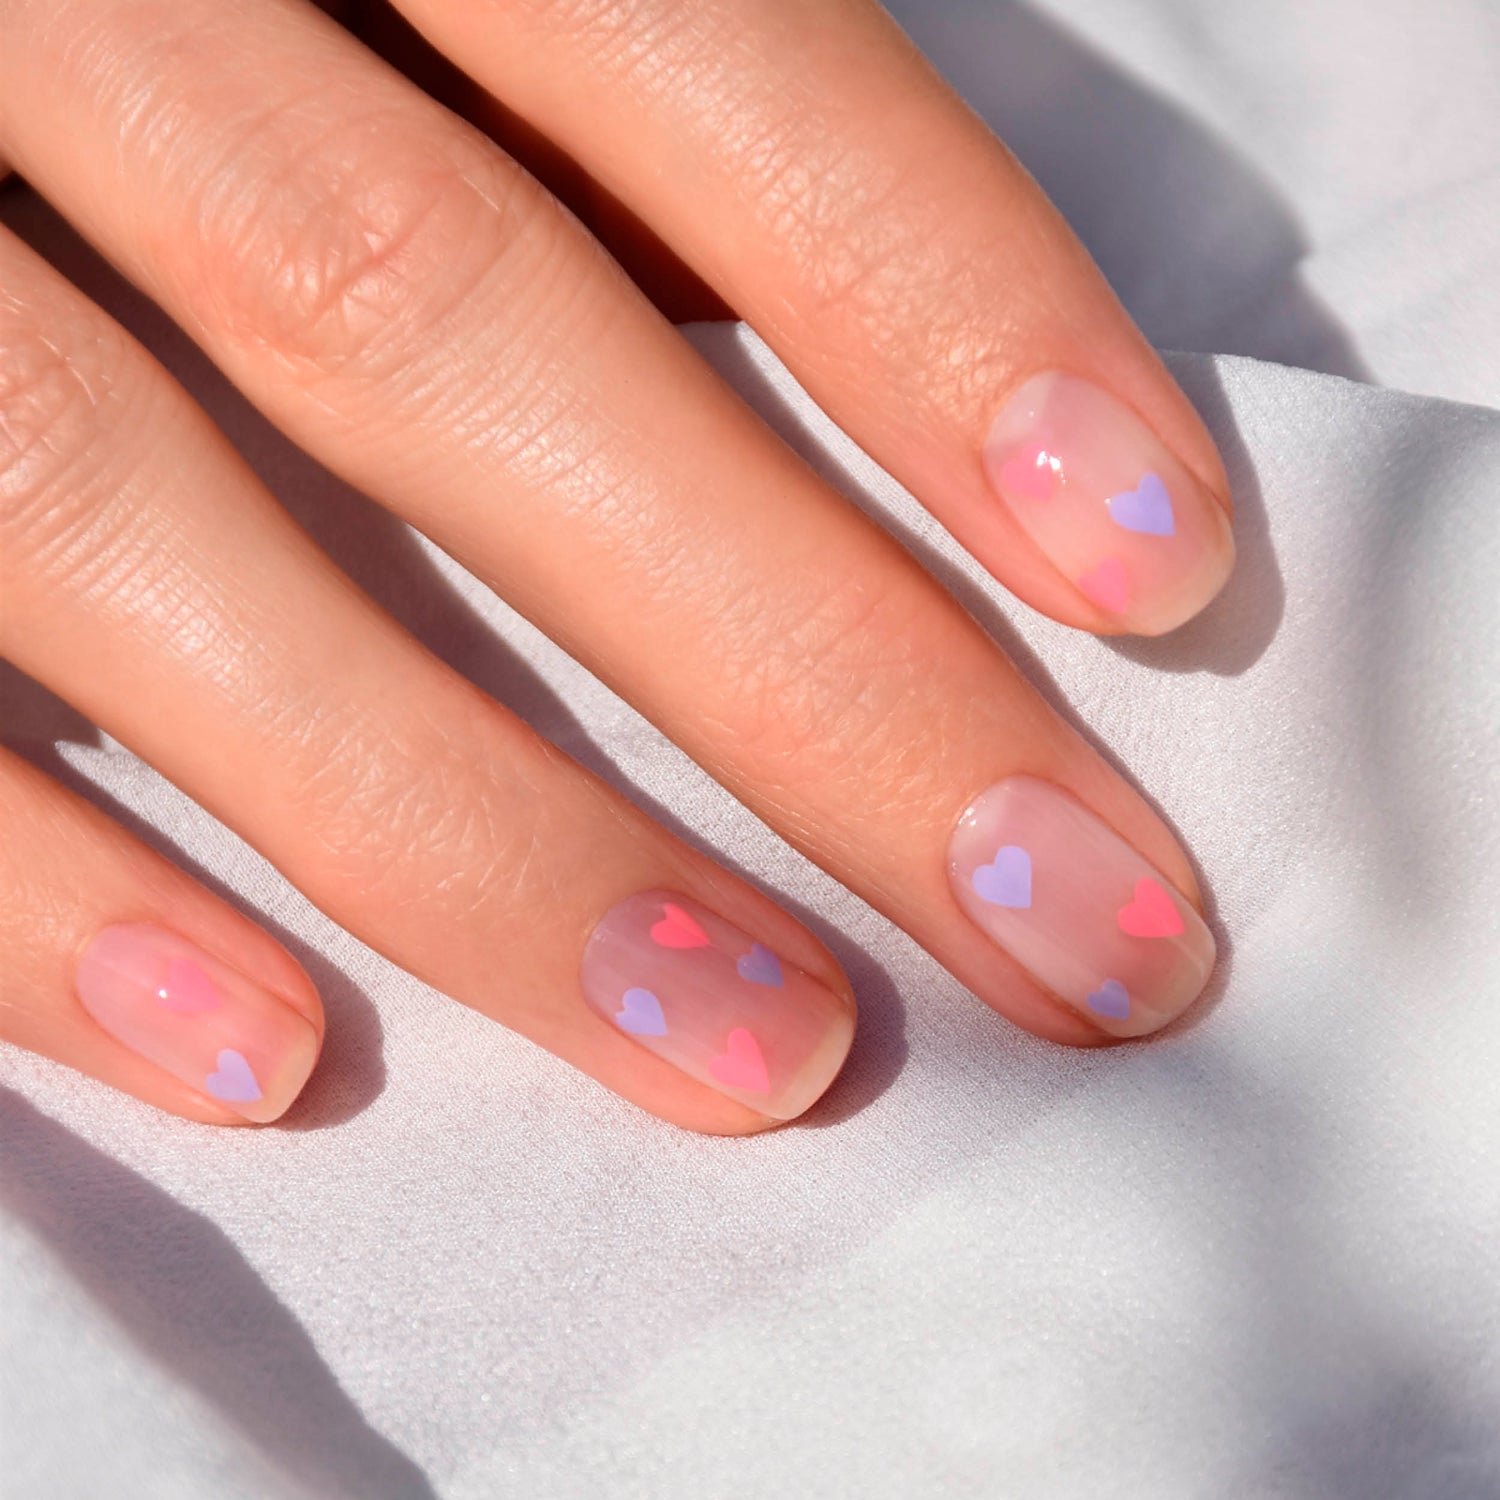 The latest trends in awesome nail art